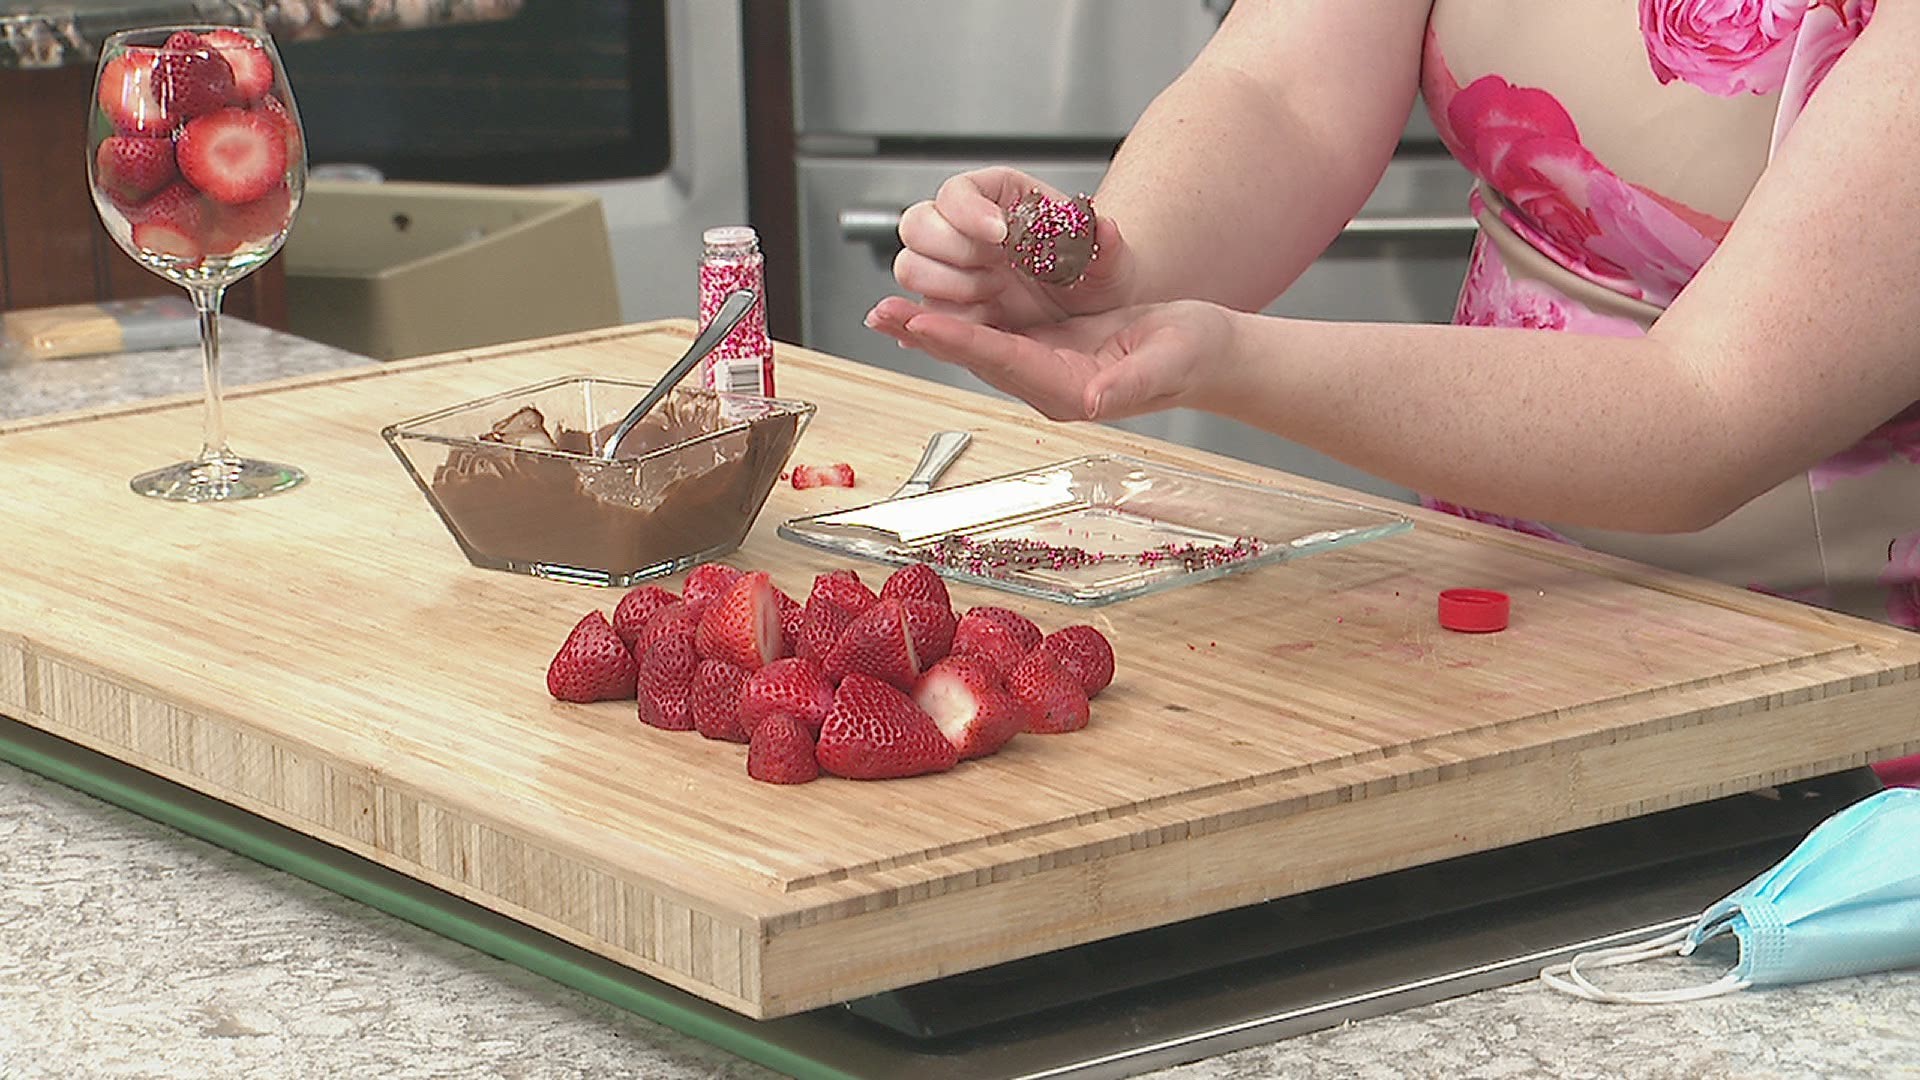 Katherine and Morgan try making chocolate covered strawberry hearts for Valentine's Day